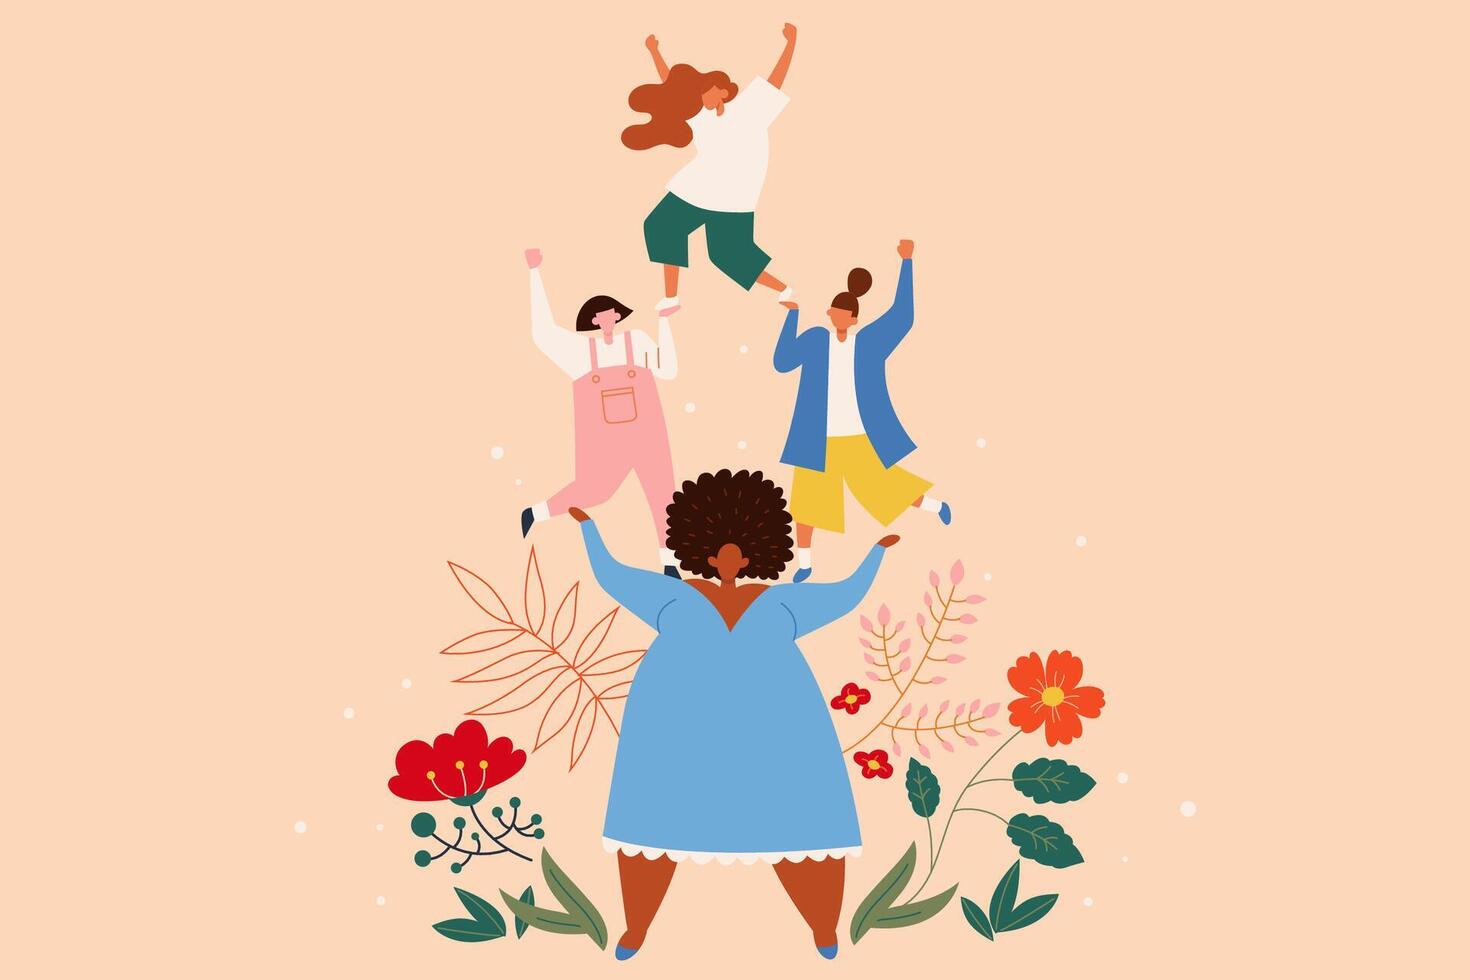 Female networking and support group. Flat style illustration of a woman balancing other females on her shoulders on beige background vector